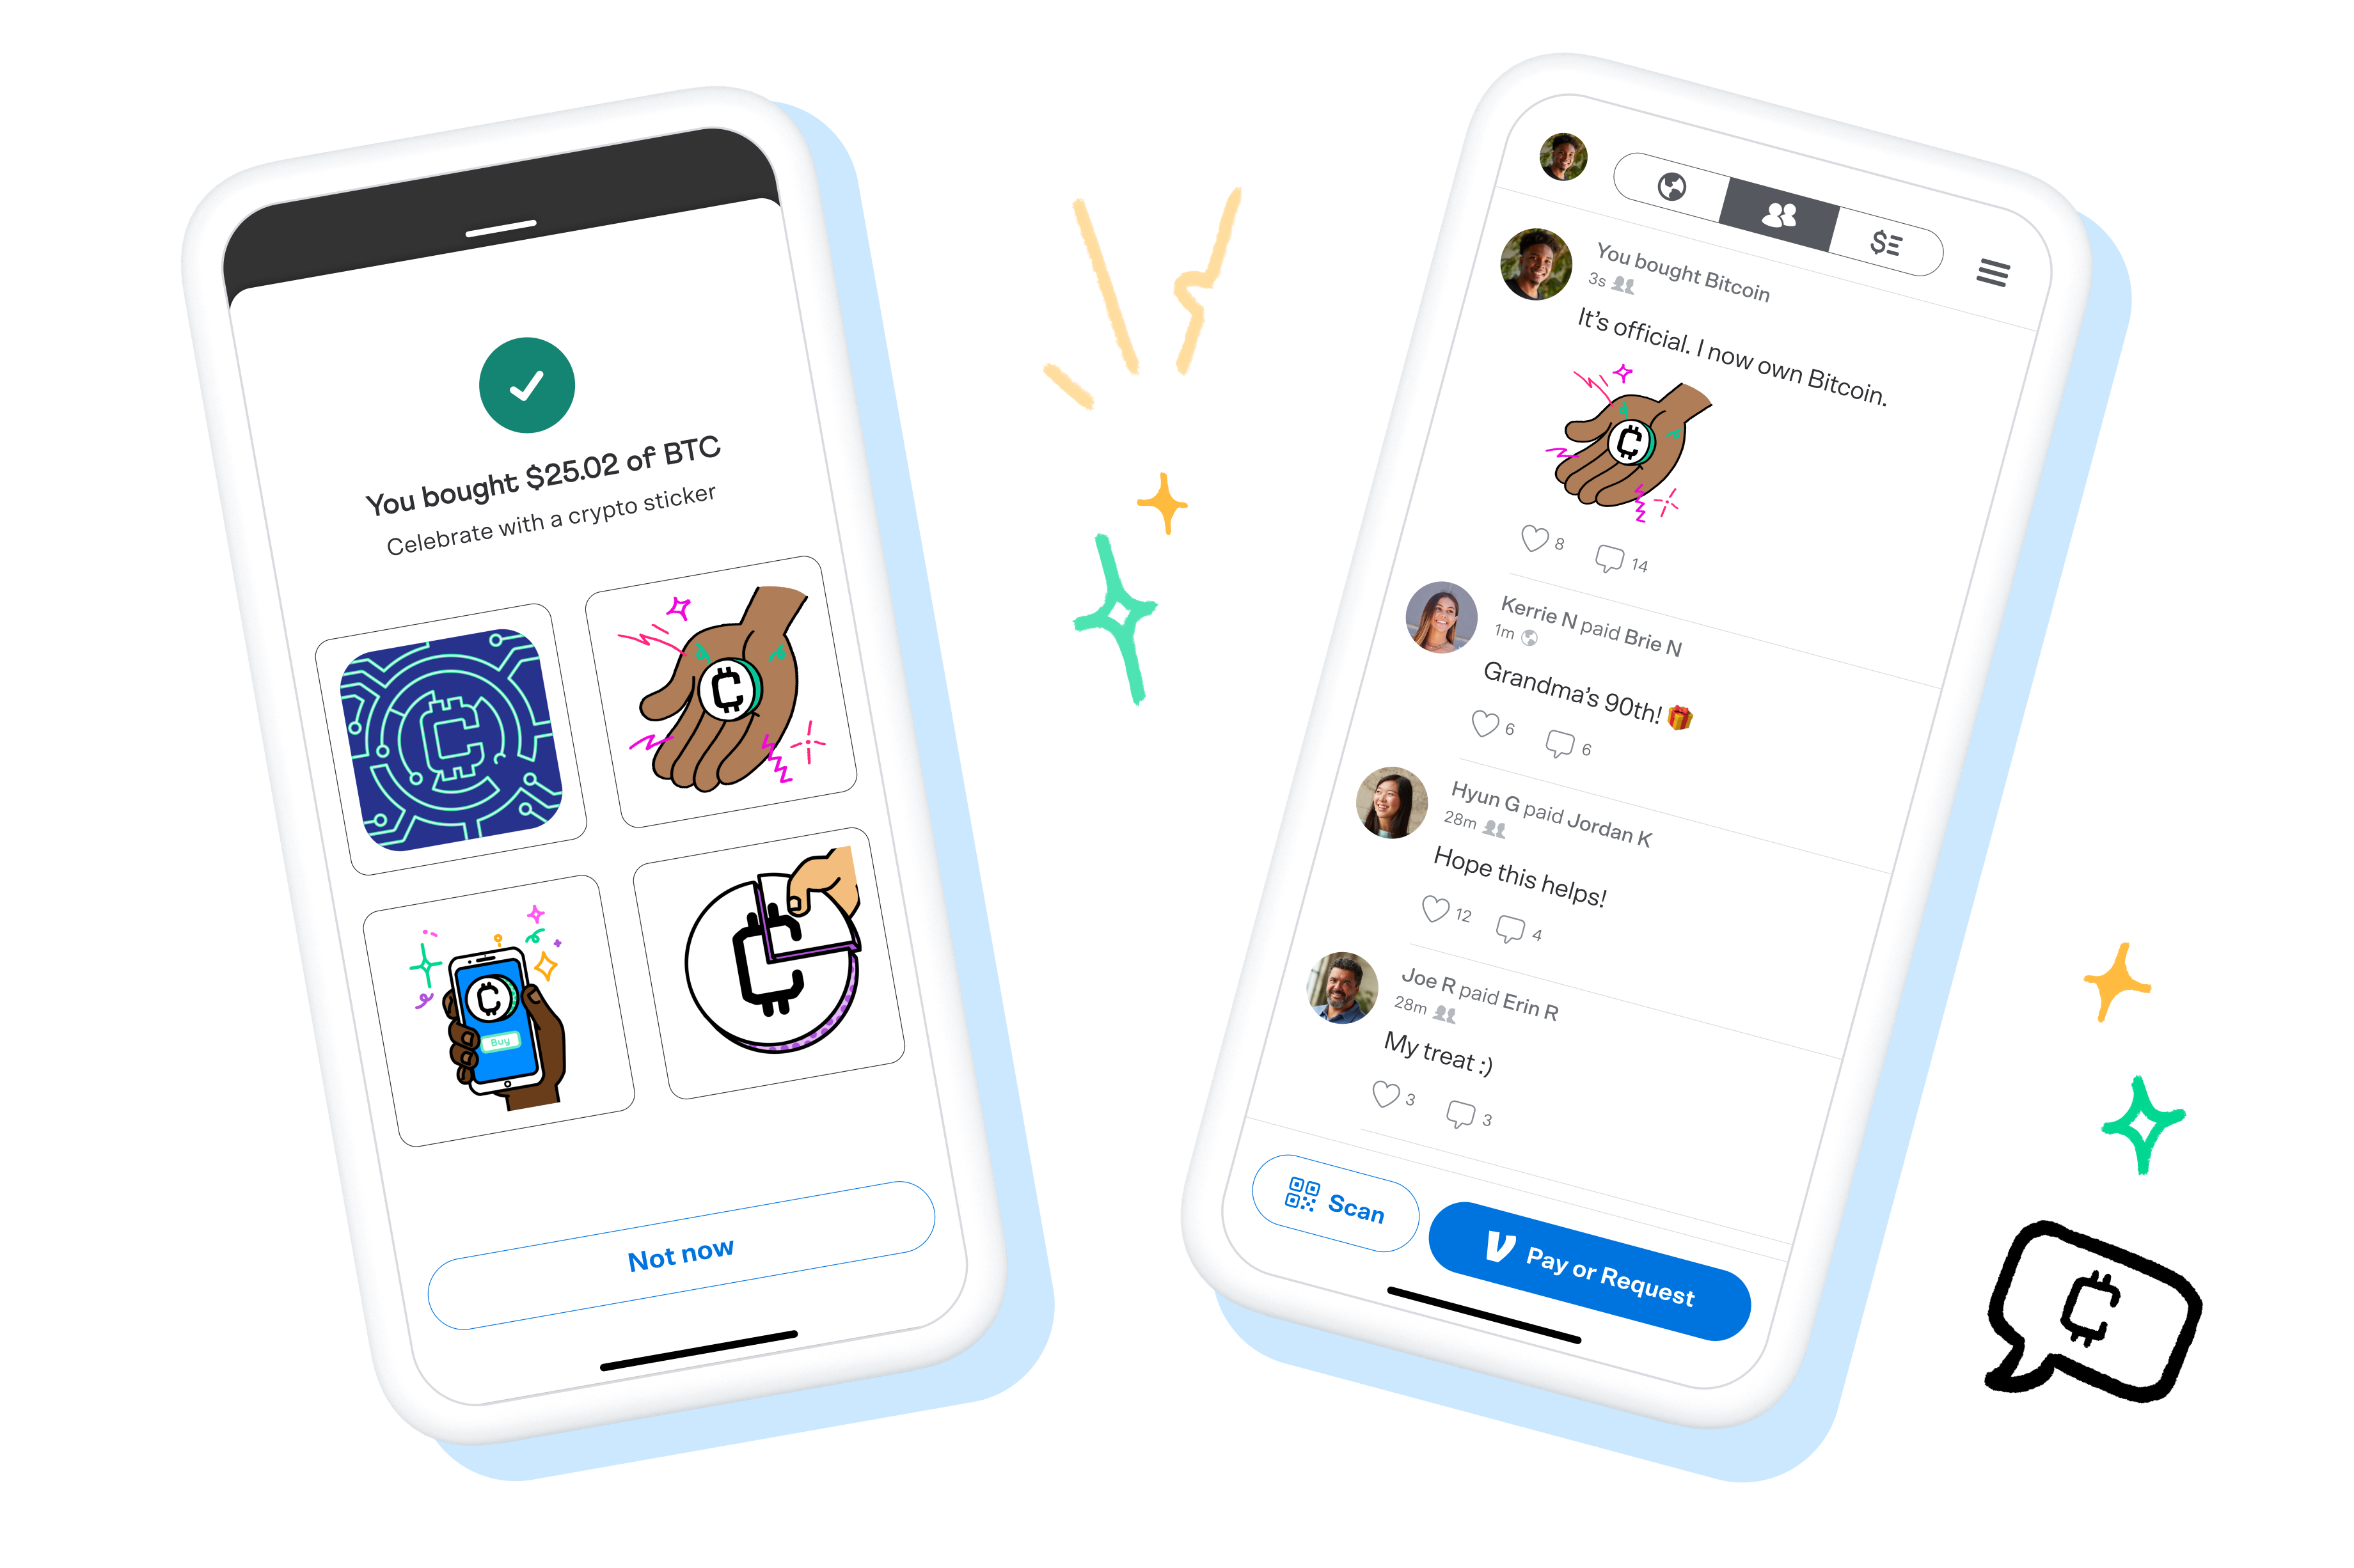 is venmo good for crypto